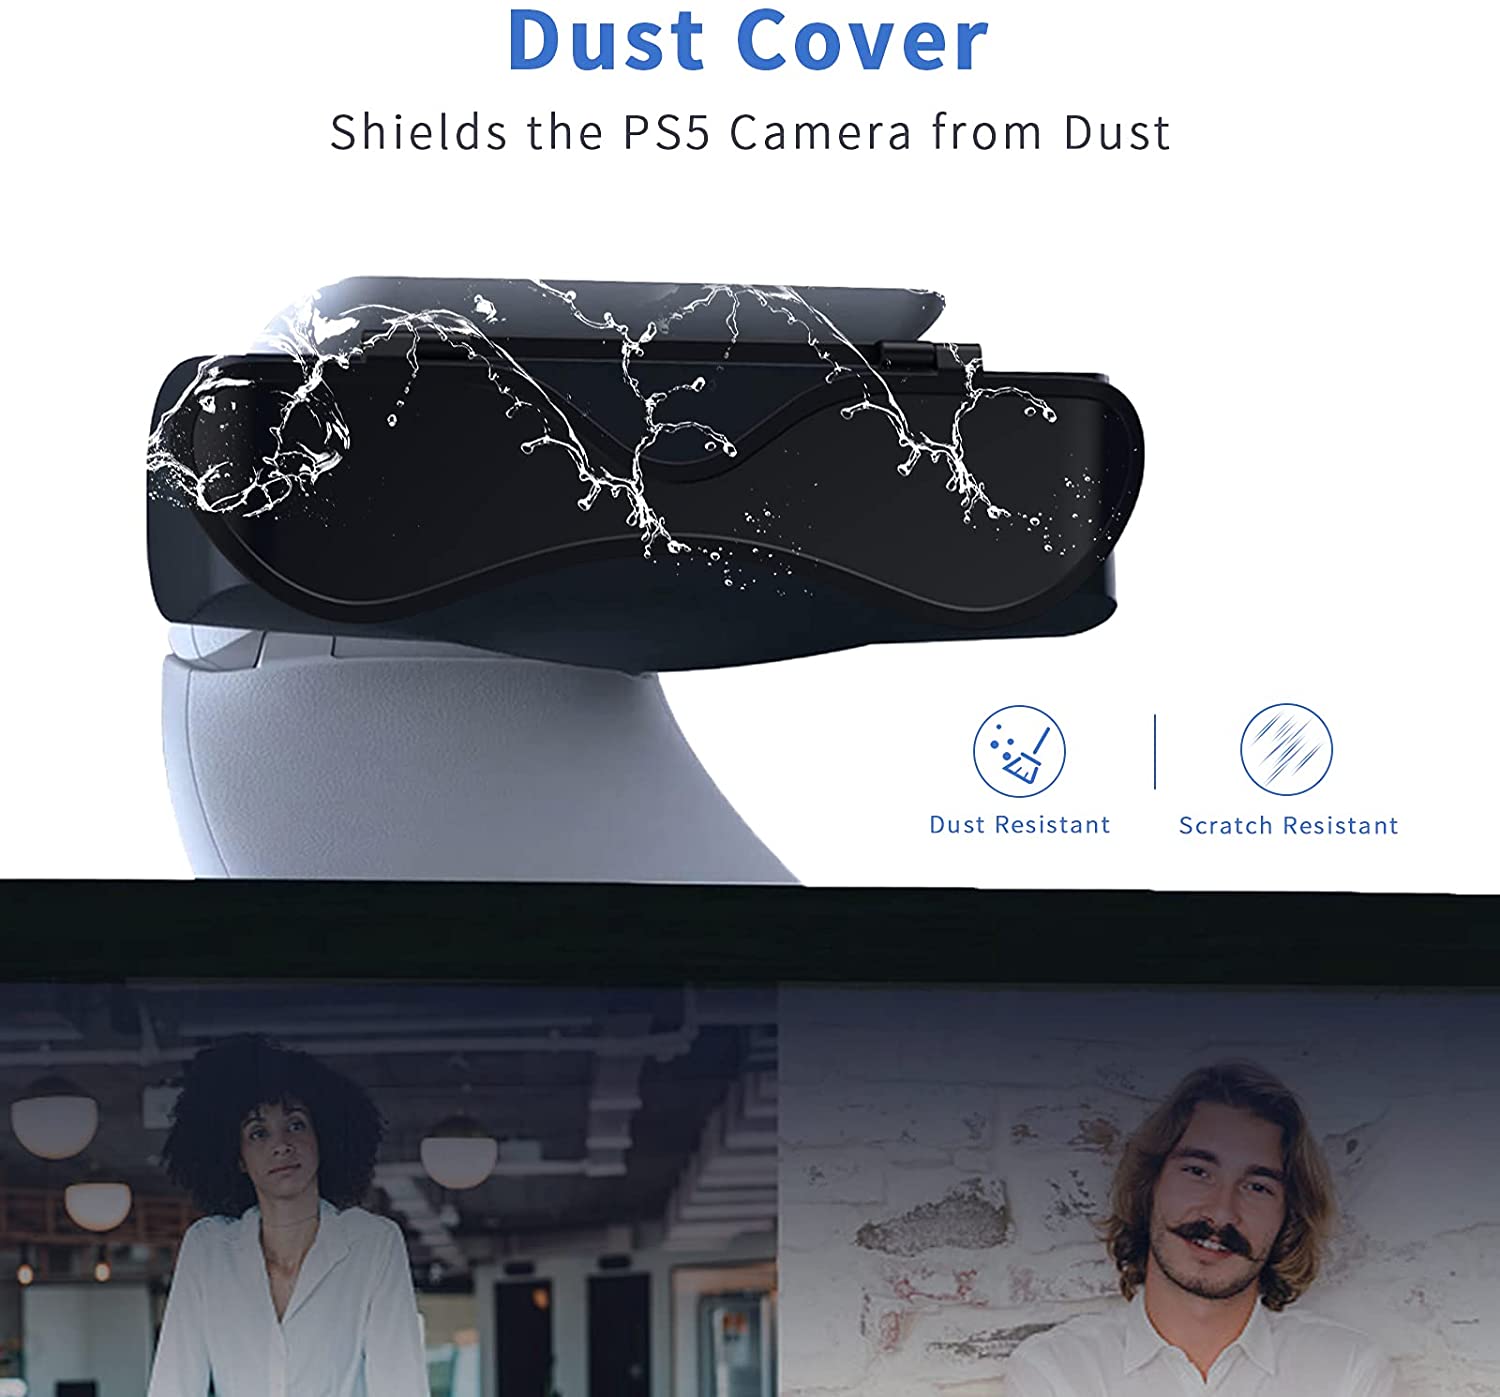 The cover can prevent dust and scratches.